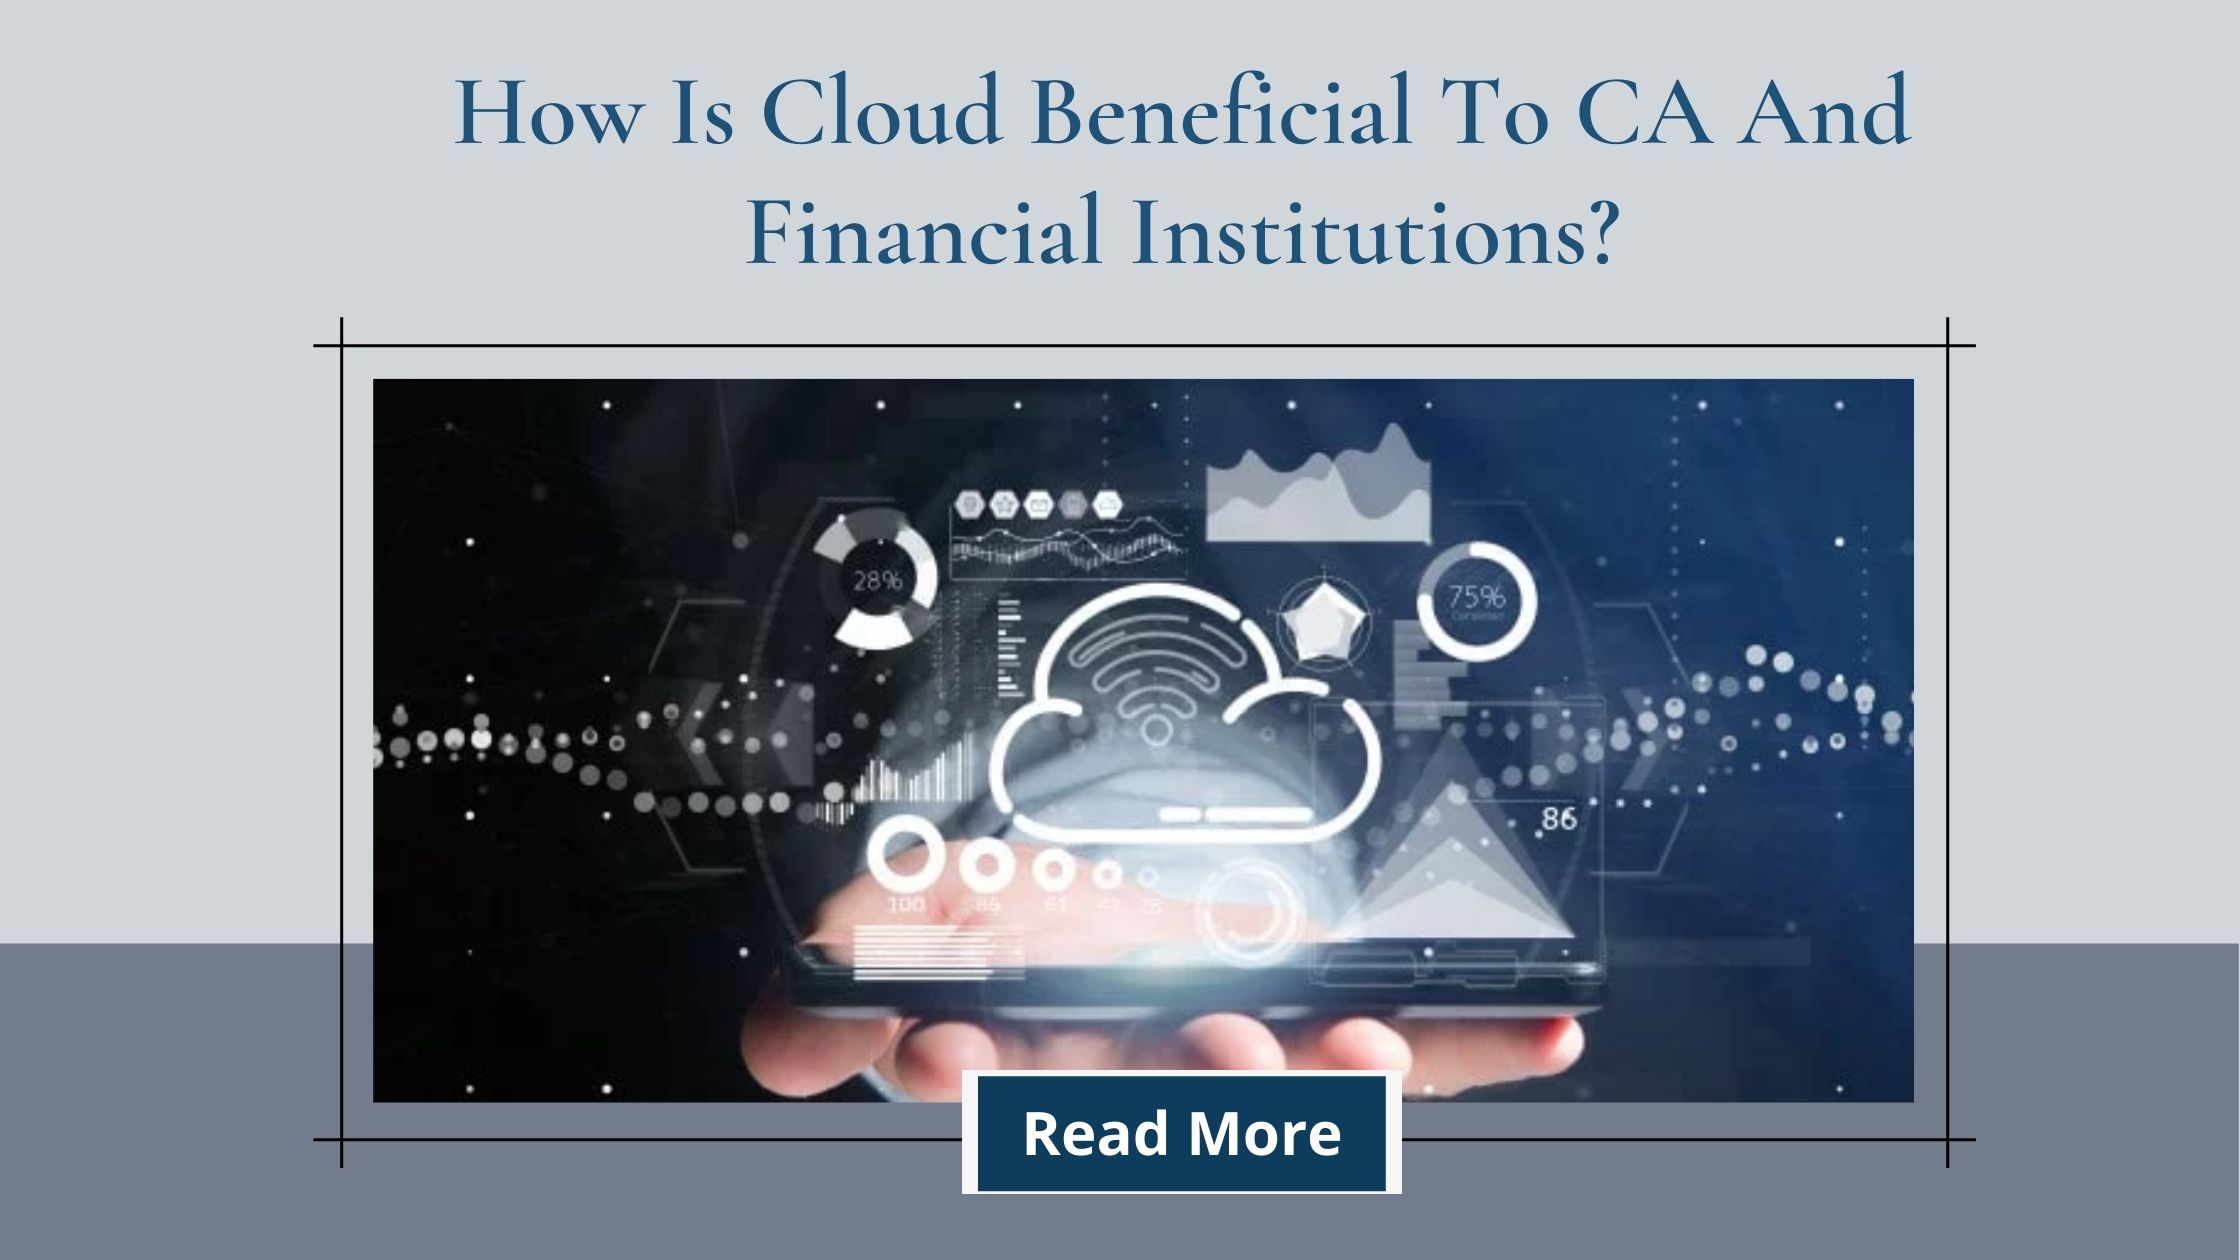 Tally Cloud Beneficial for CA And Financial Institutions